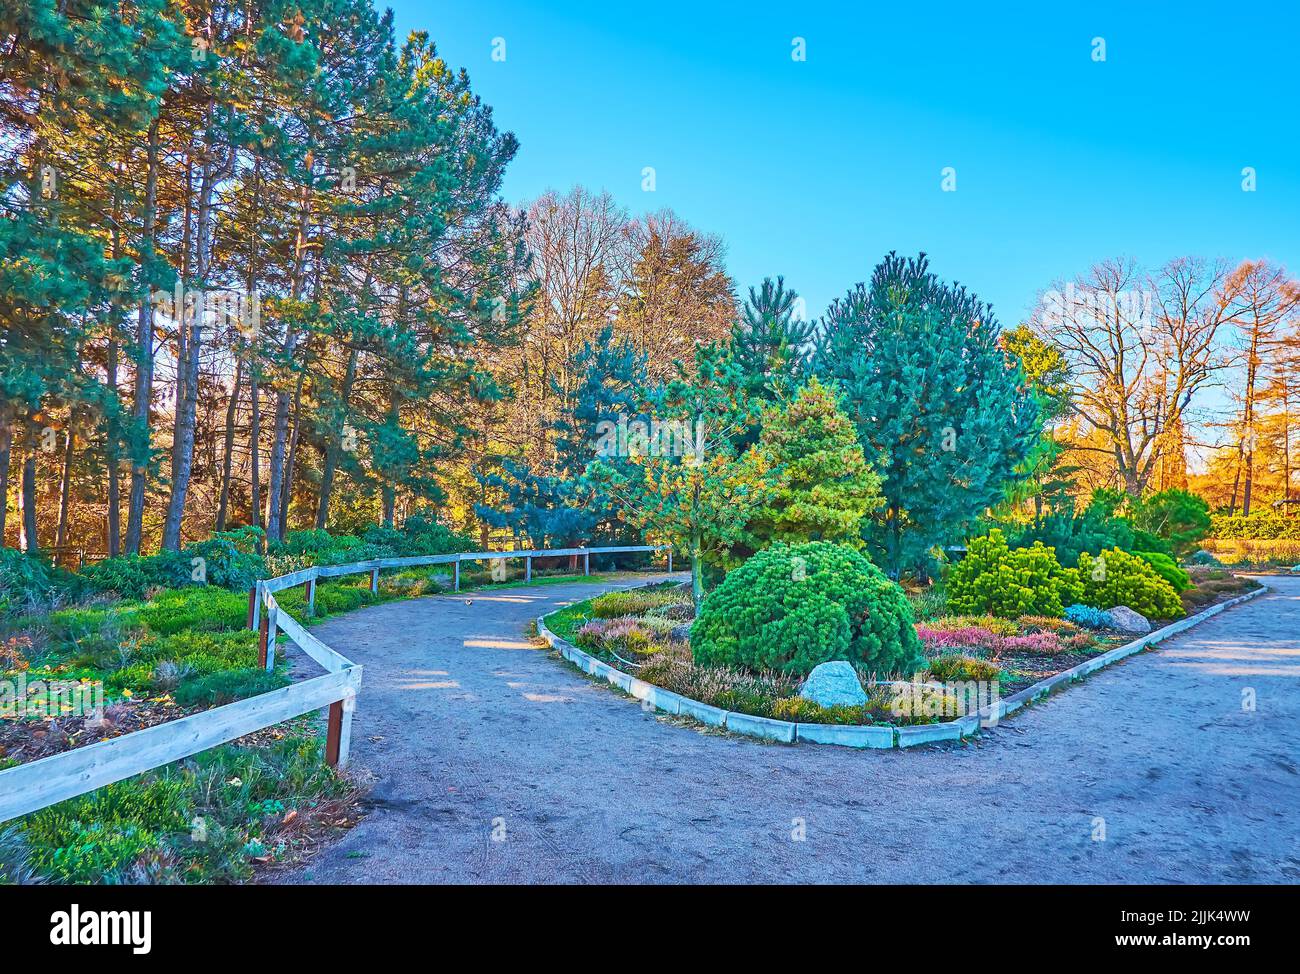 The picturesque green conifer plants - pines, spruces, larchs, junipers and others in Kyiv Botanical Garden, Ukraine Stock Photo